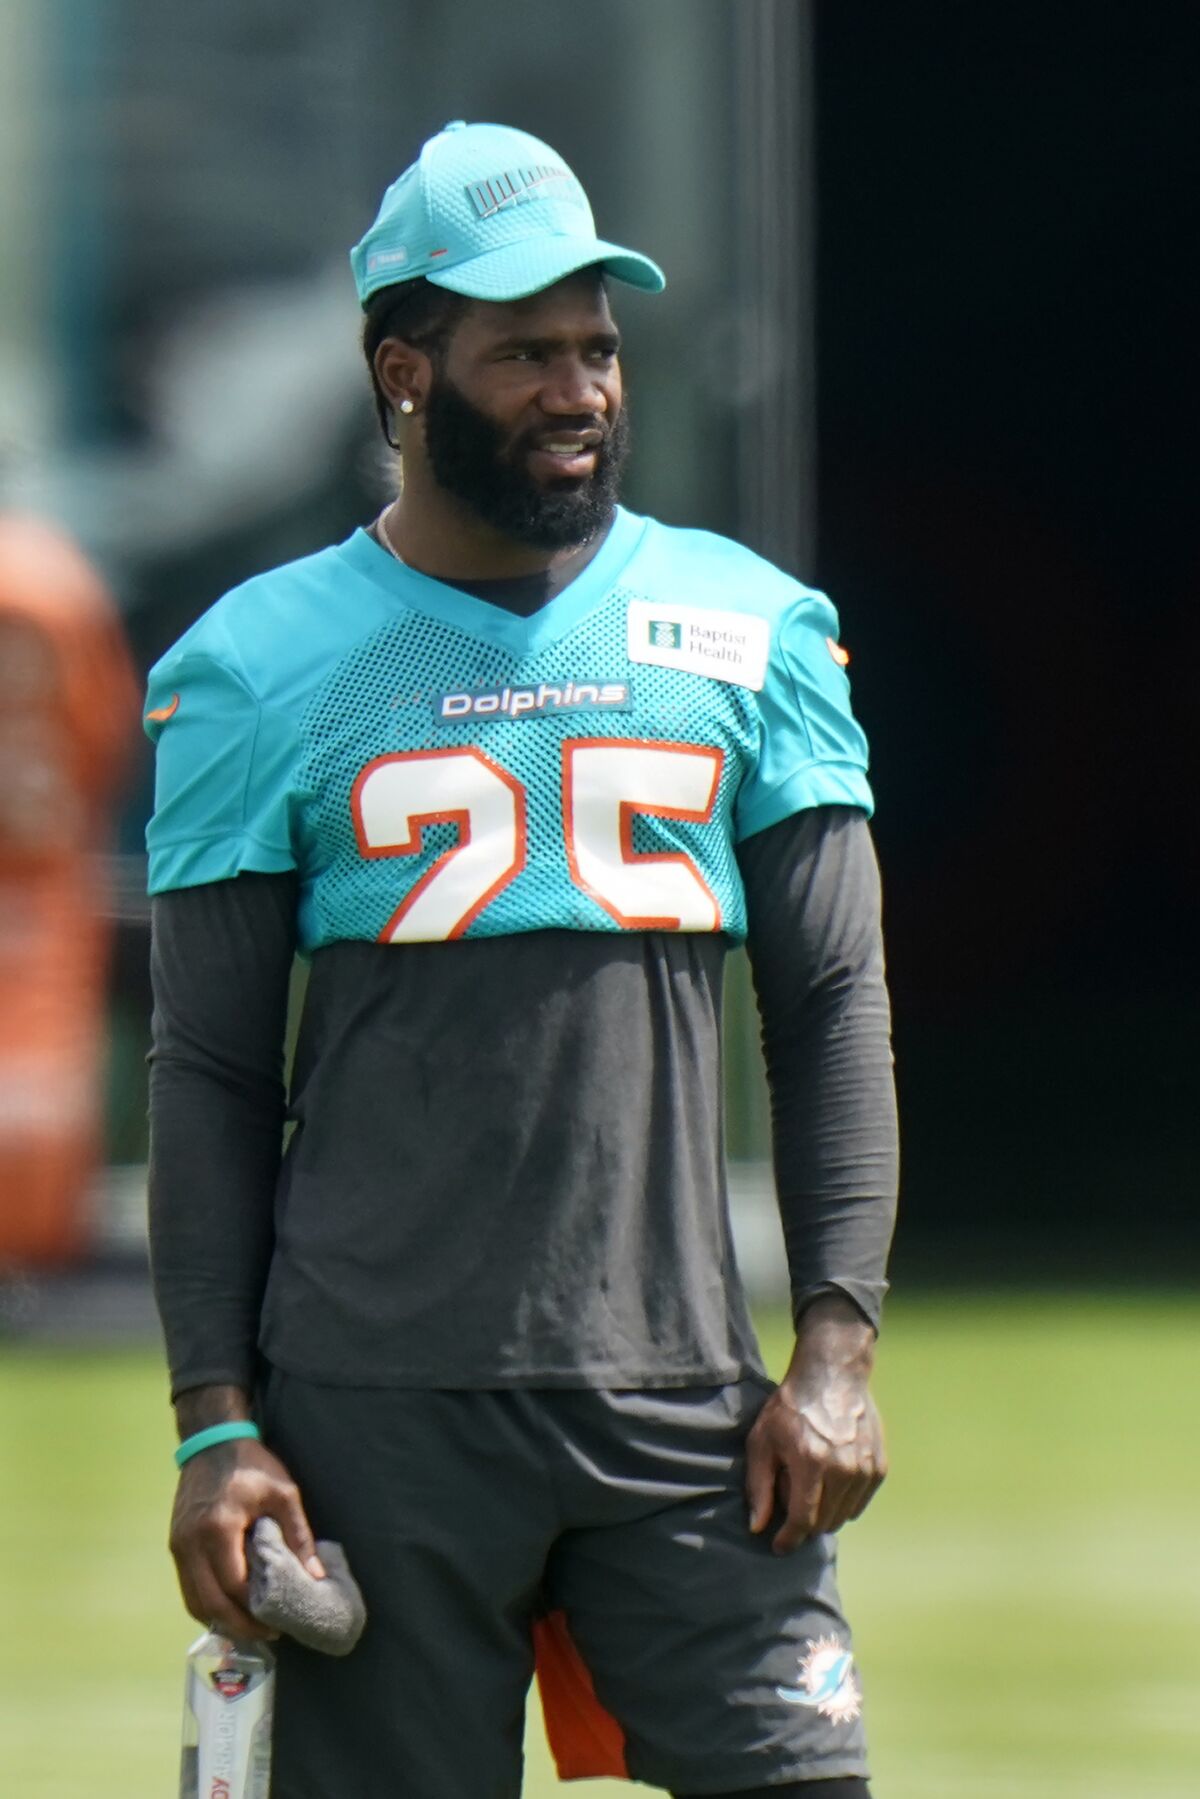 Miami Dolphins cornerback Xavien Howard watches during practice at the NFL football team's training facility, Wednesday, Aug. 4, 2021, in Miami Gardens, Fla. (AP Photo/Wilfredo Lee)